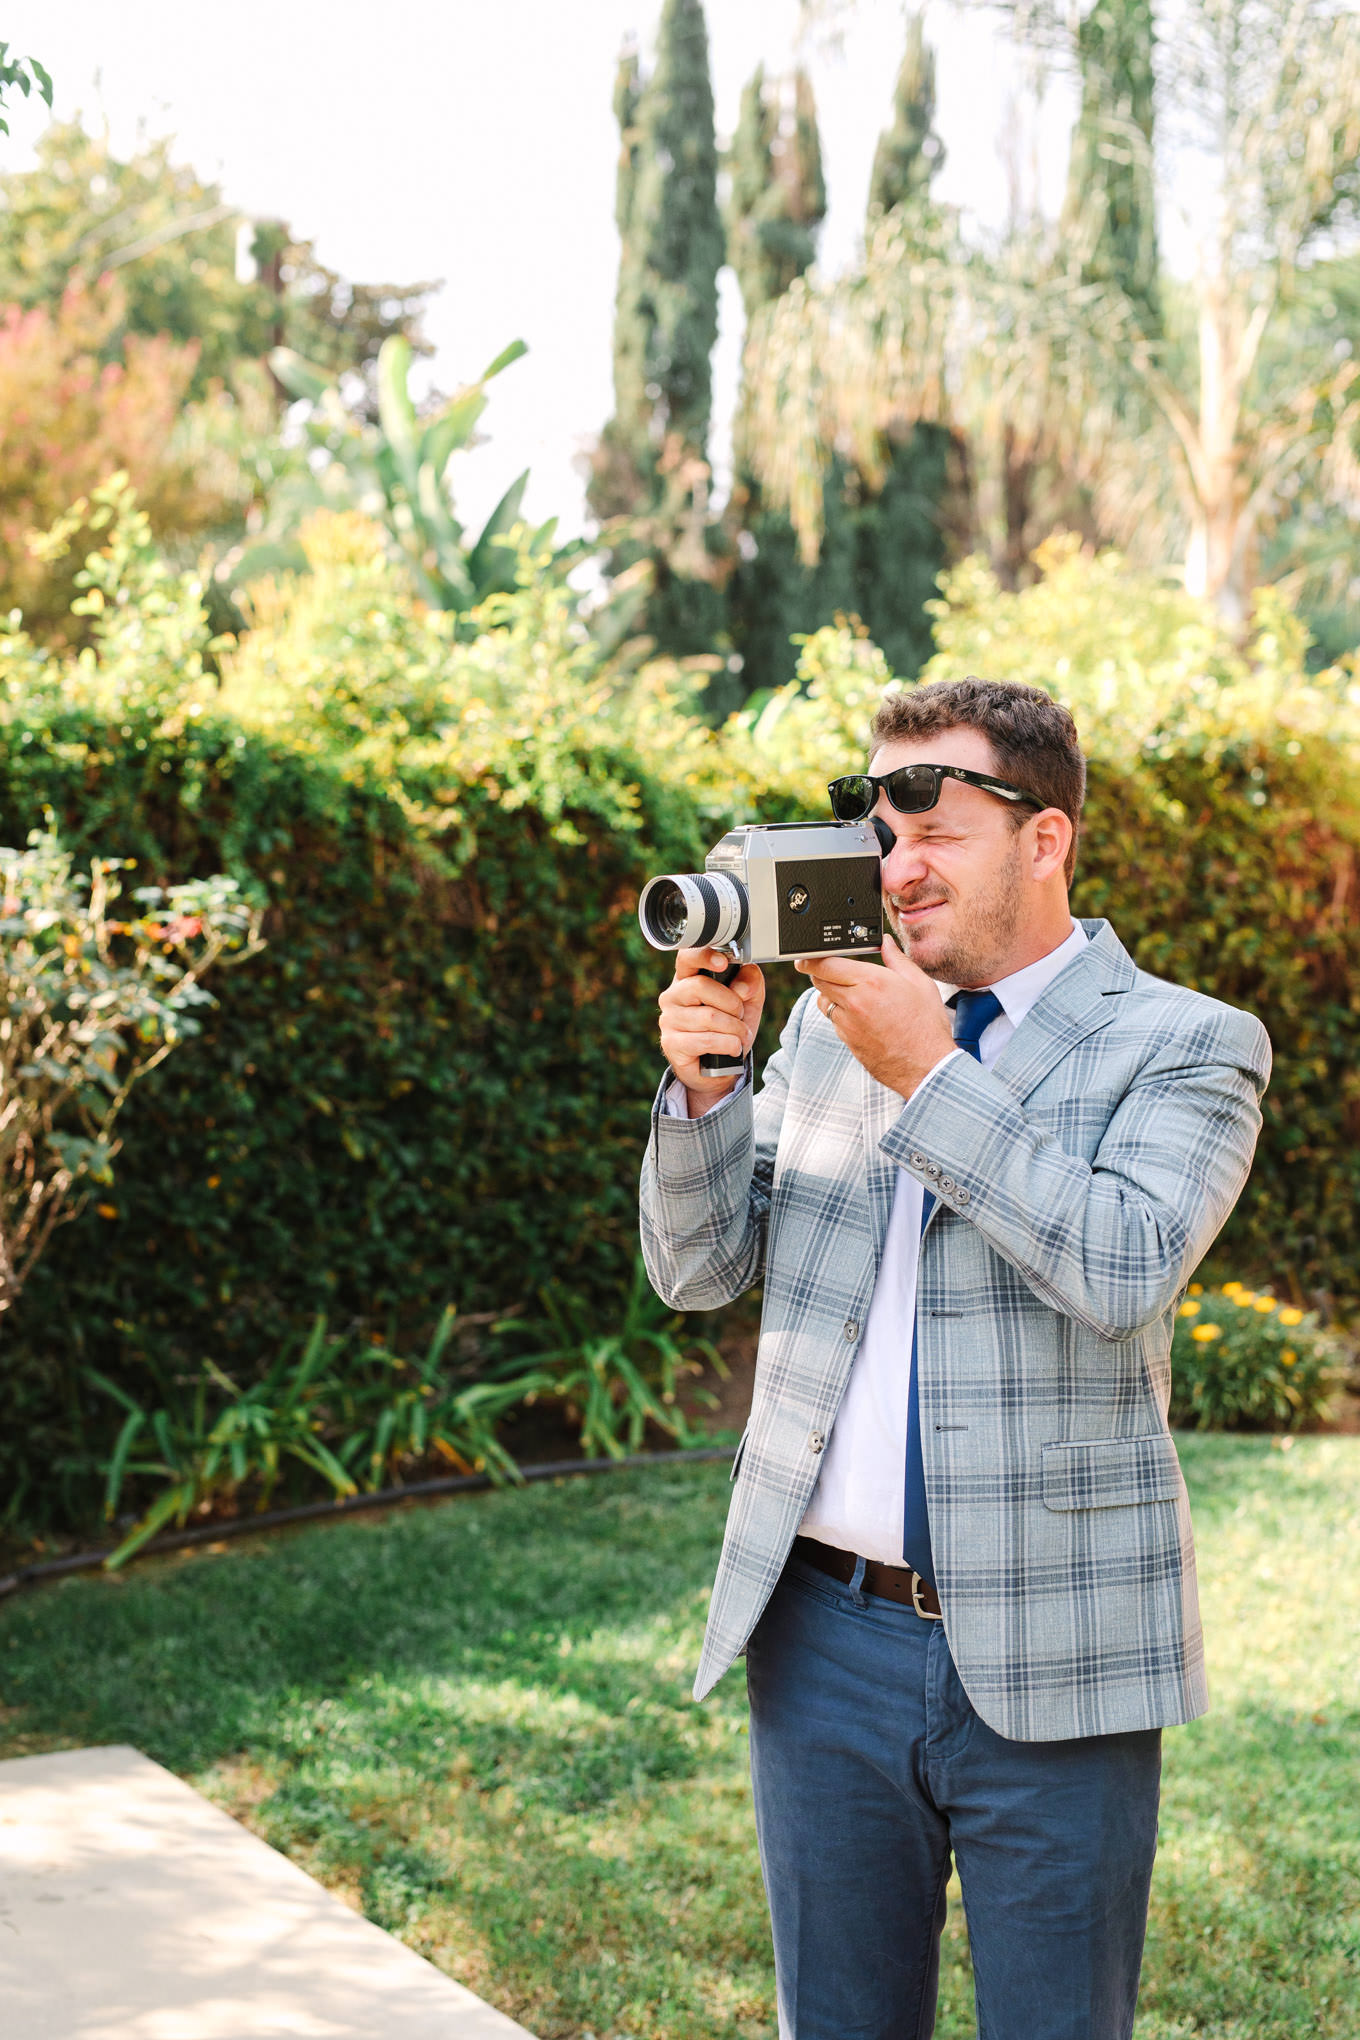 Behind the scenes at outdoor micro wedding | Vibrant backyard micro wedding featured on Green Wedding Shoes | Colorful LA wedding photography | #losangeleswedding #backyardwedding #microwedding #laweddingphotographer Source: Mary Costa Photography | Los Angeles